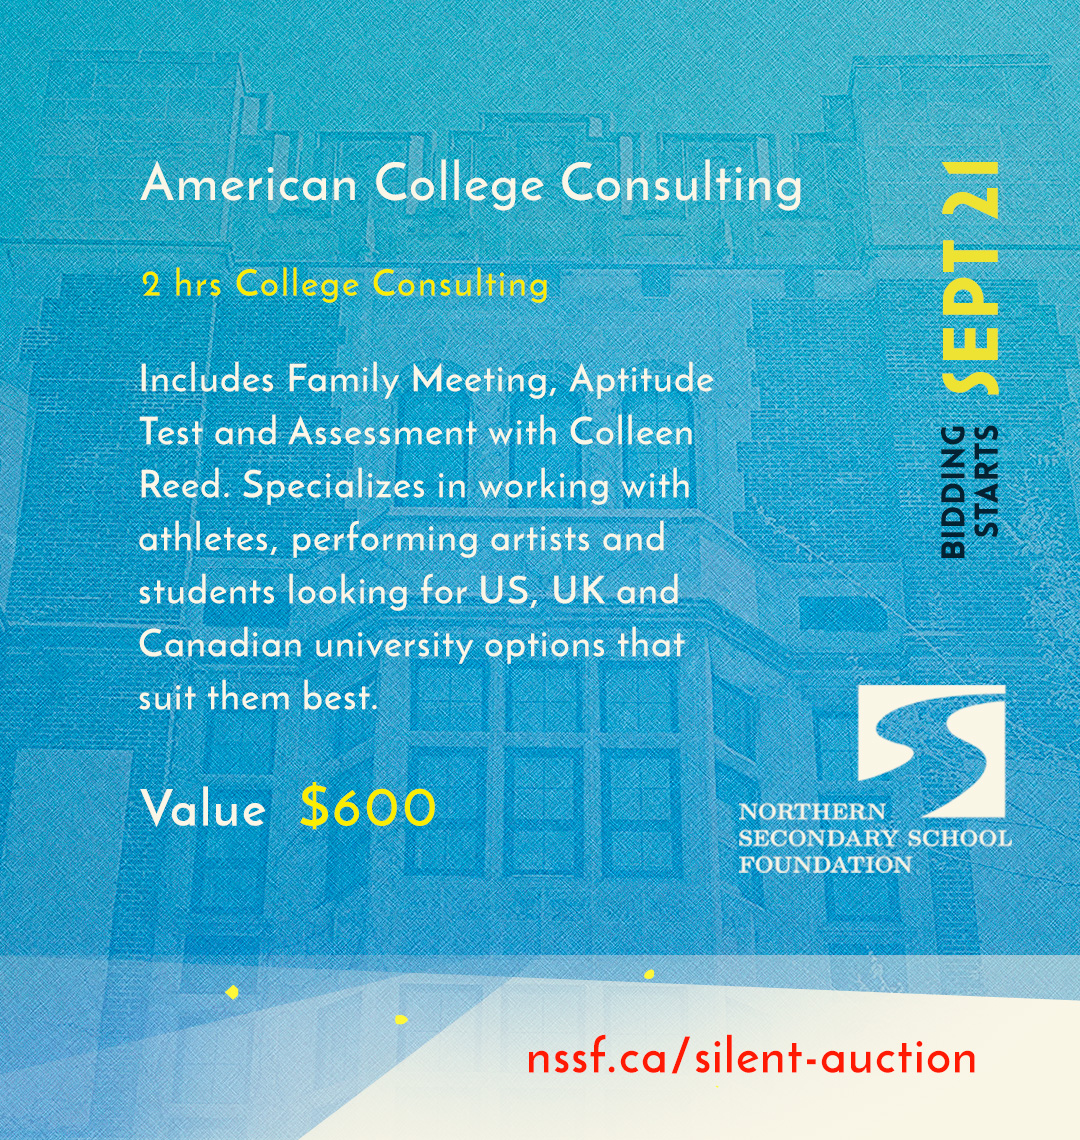 AMERICAN COLLEGE CONSULTING item info